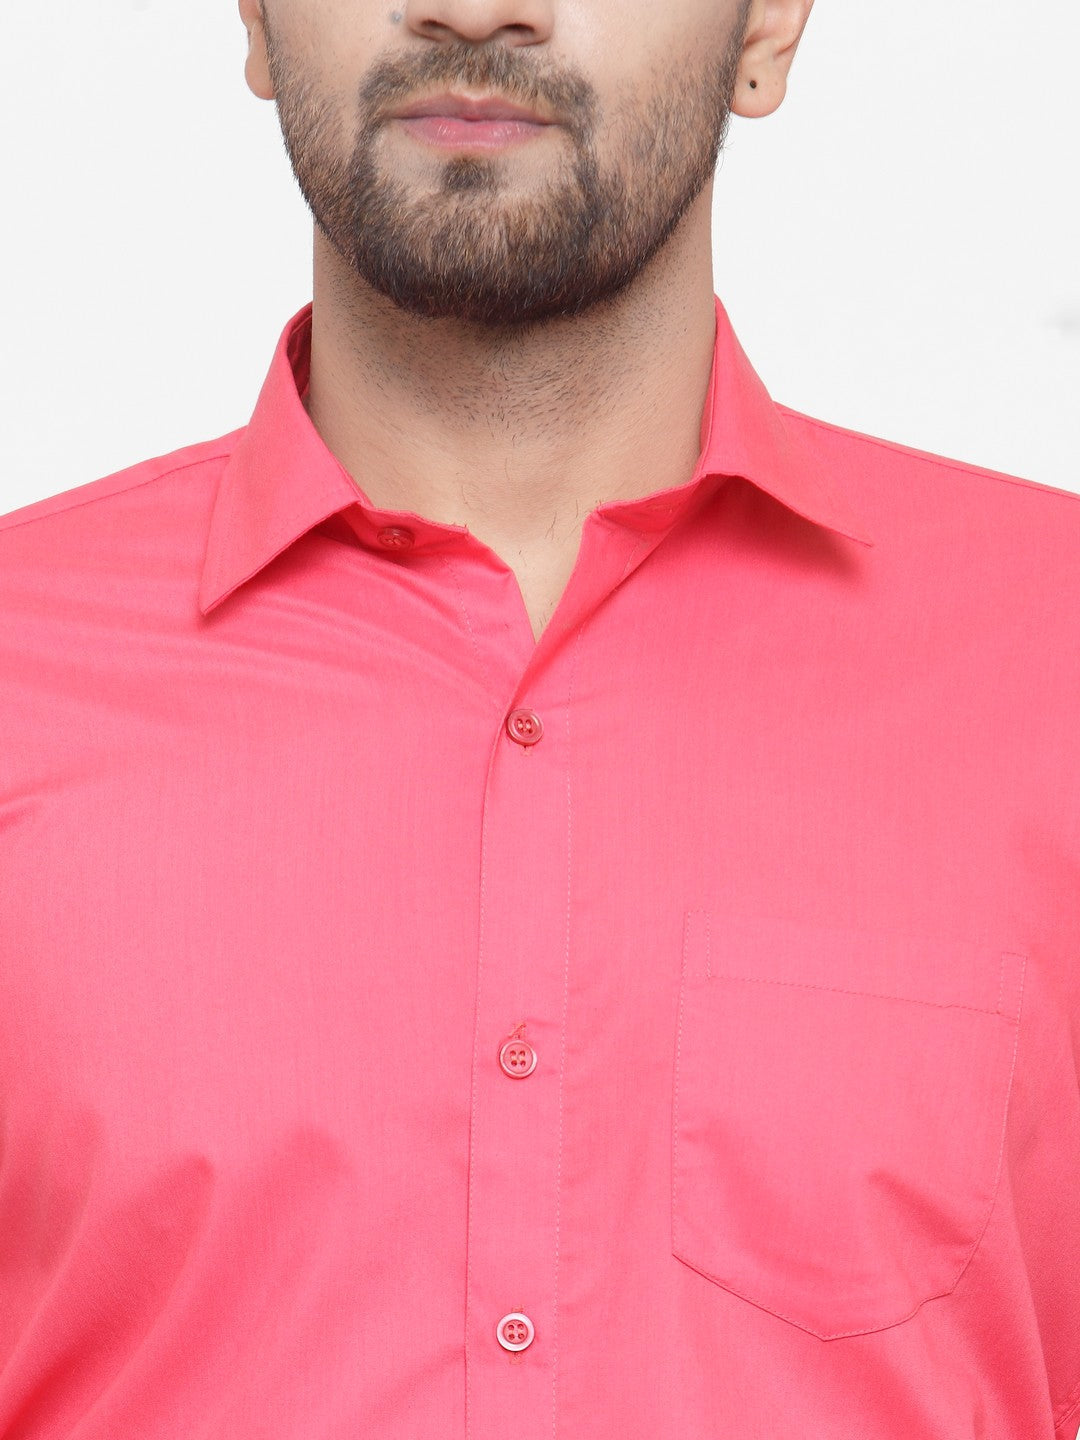 Men's Cotton Solid Coral Red Formal Shirt's ( SF 361Coral ) - Jainish